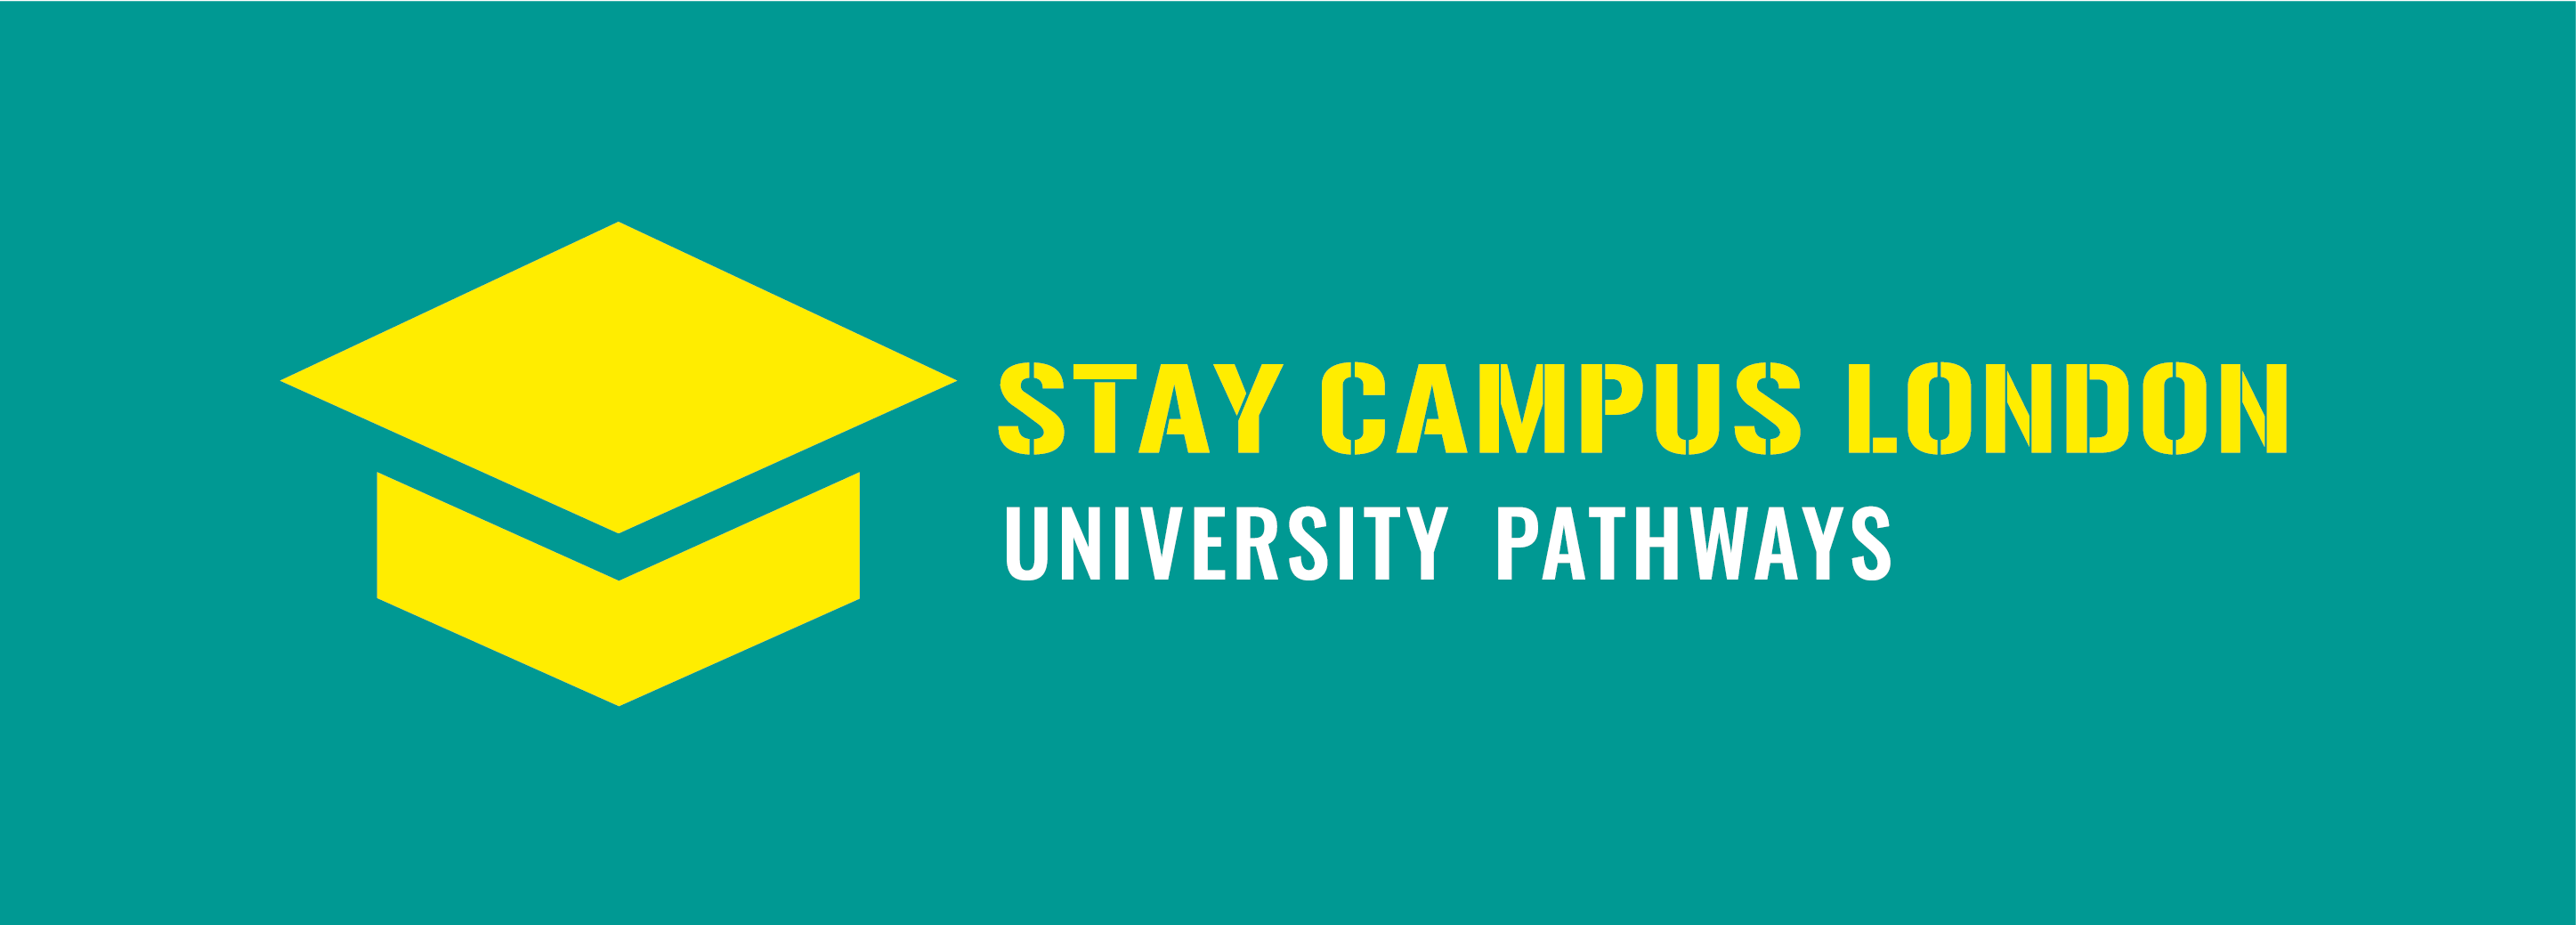 Stay Campus London